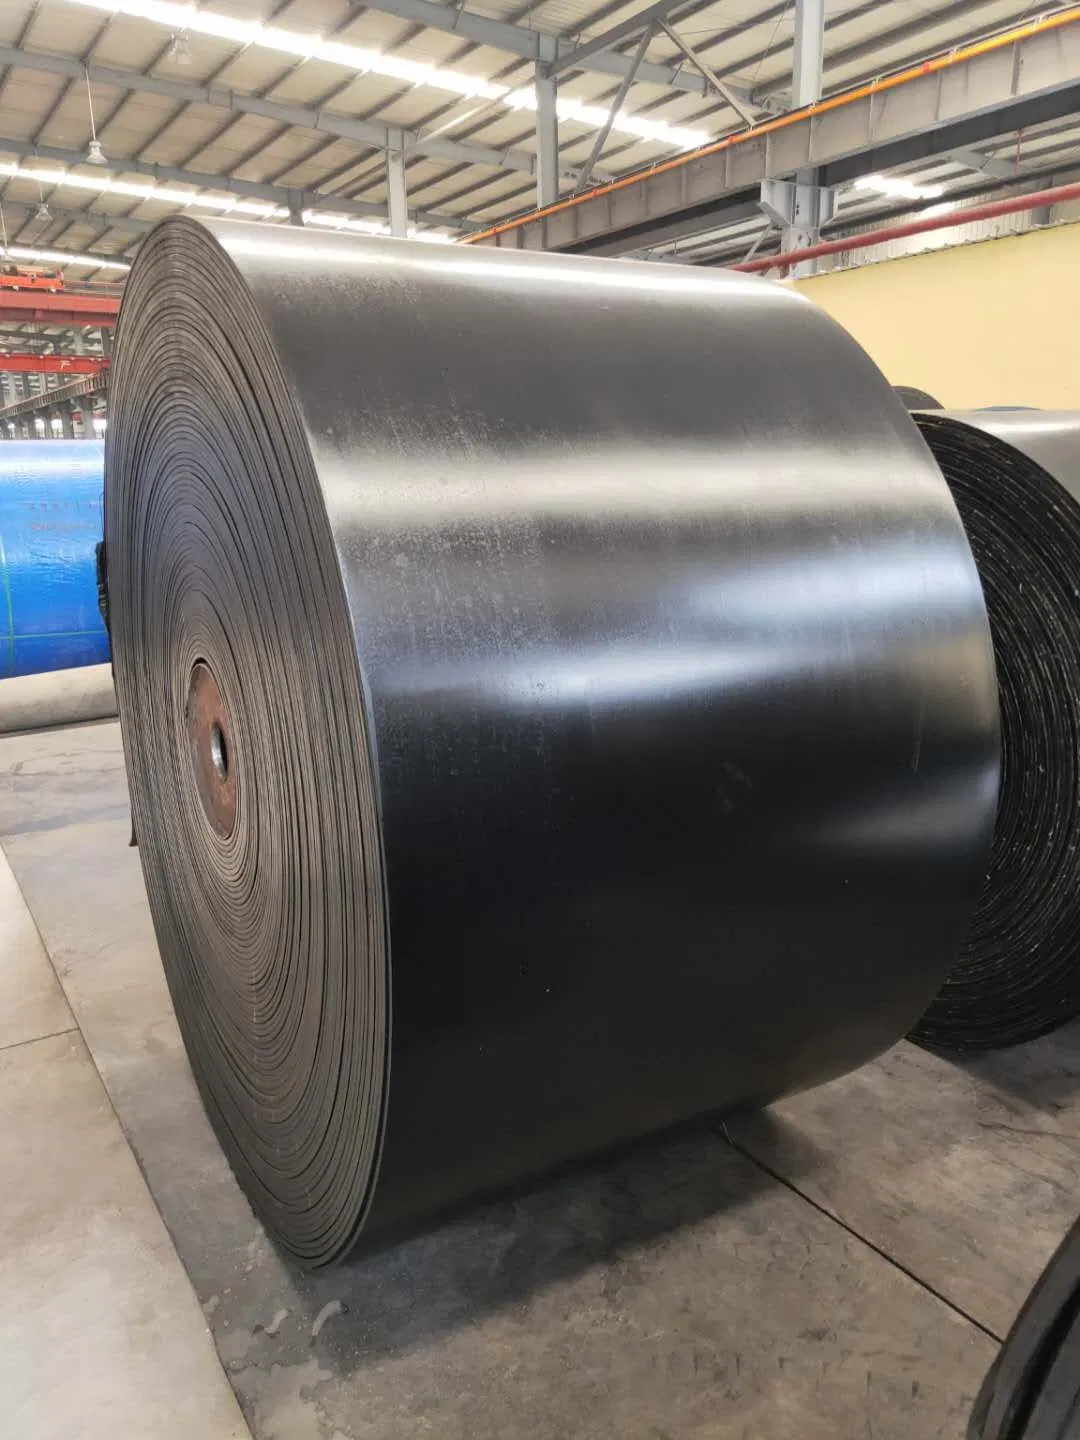 Steel Cord Conveyor Belt Used in Coal Mines, Metallurgy, Machinery, Ports, Construction, Electricity, Chemistry, Food Packing and Other Industries